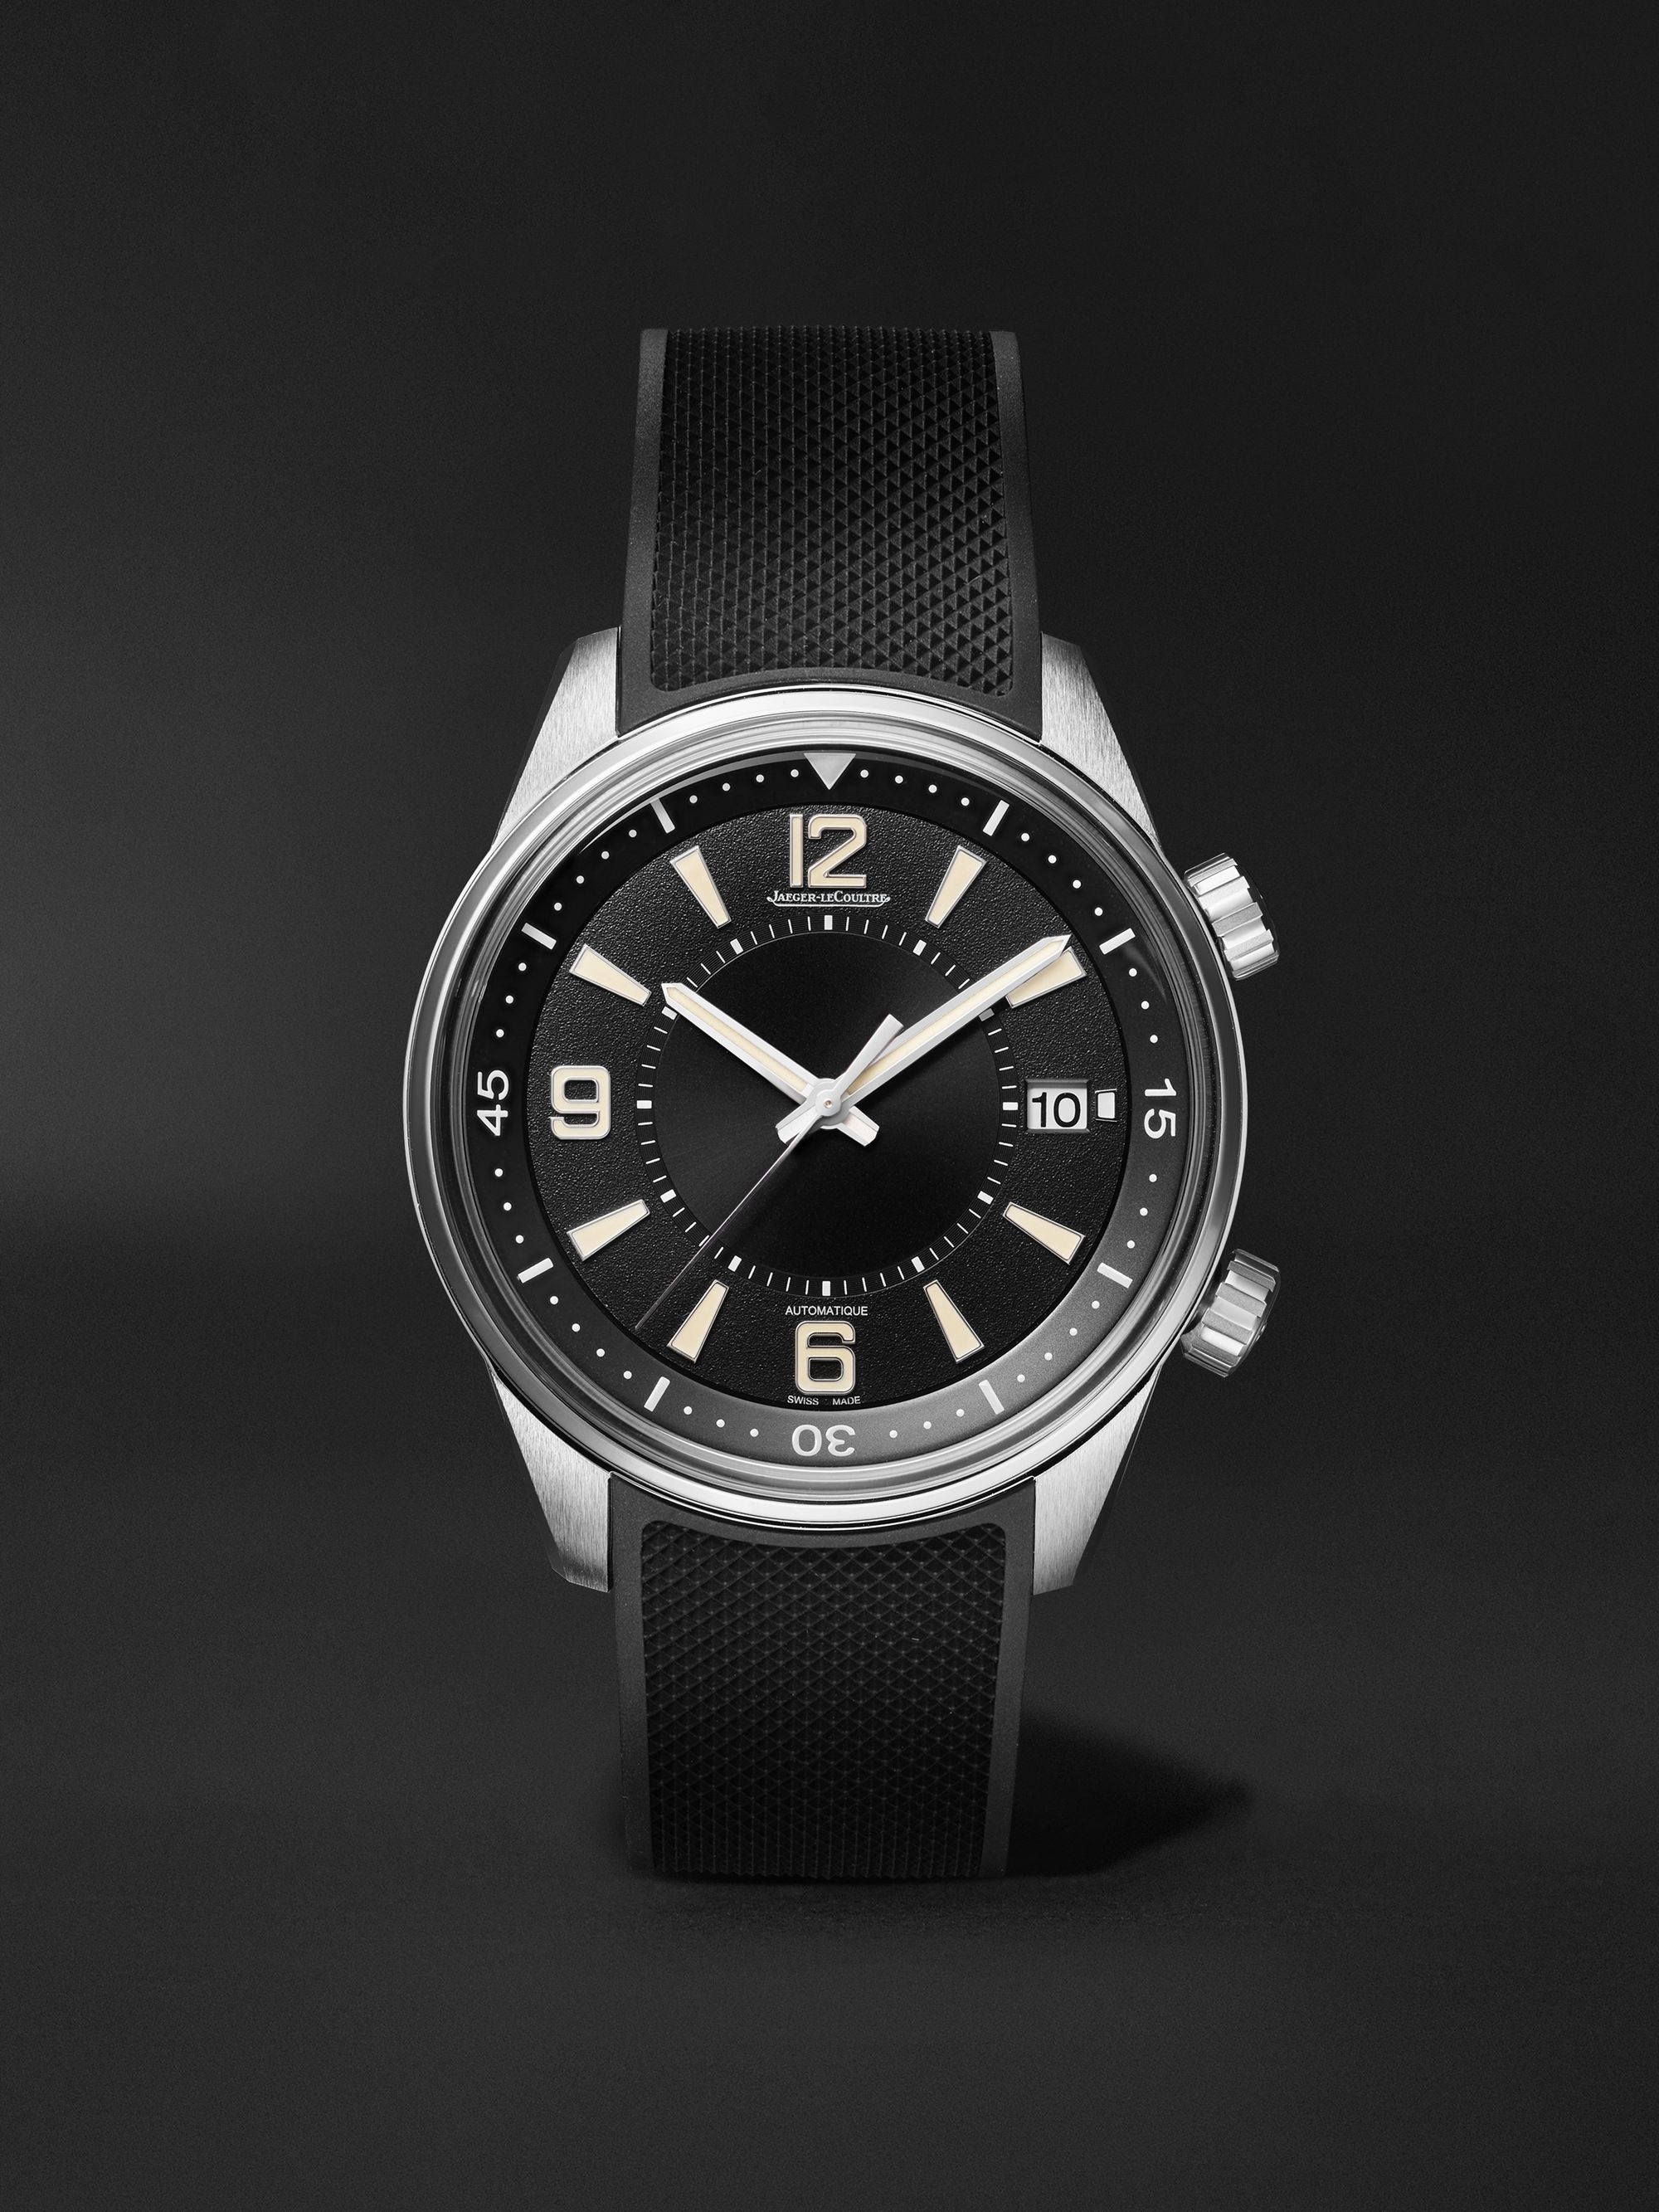 JAEGER-LECOULTRE Polaris Date Automatic 42mm Stainless Steel and Rubber Watch, Ref. No. Q9068671